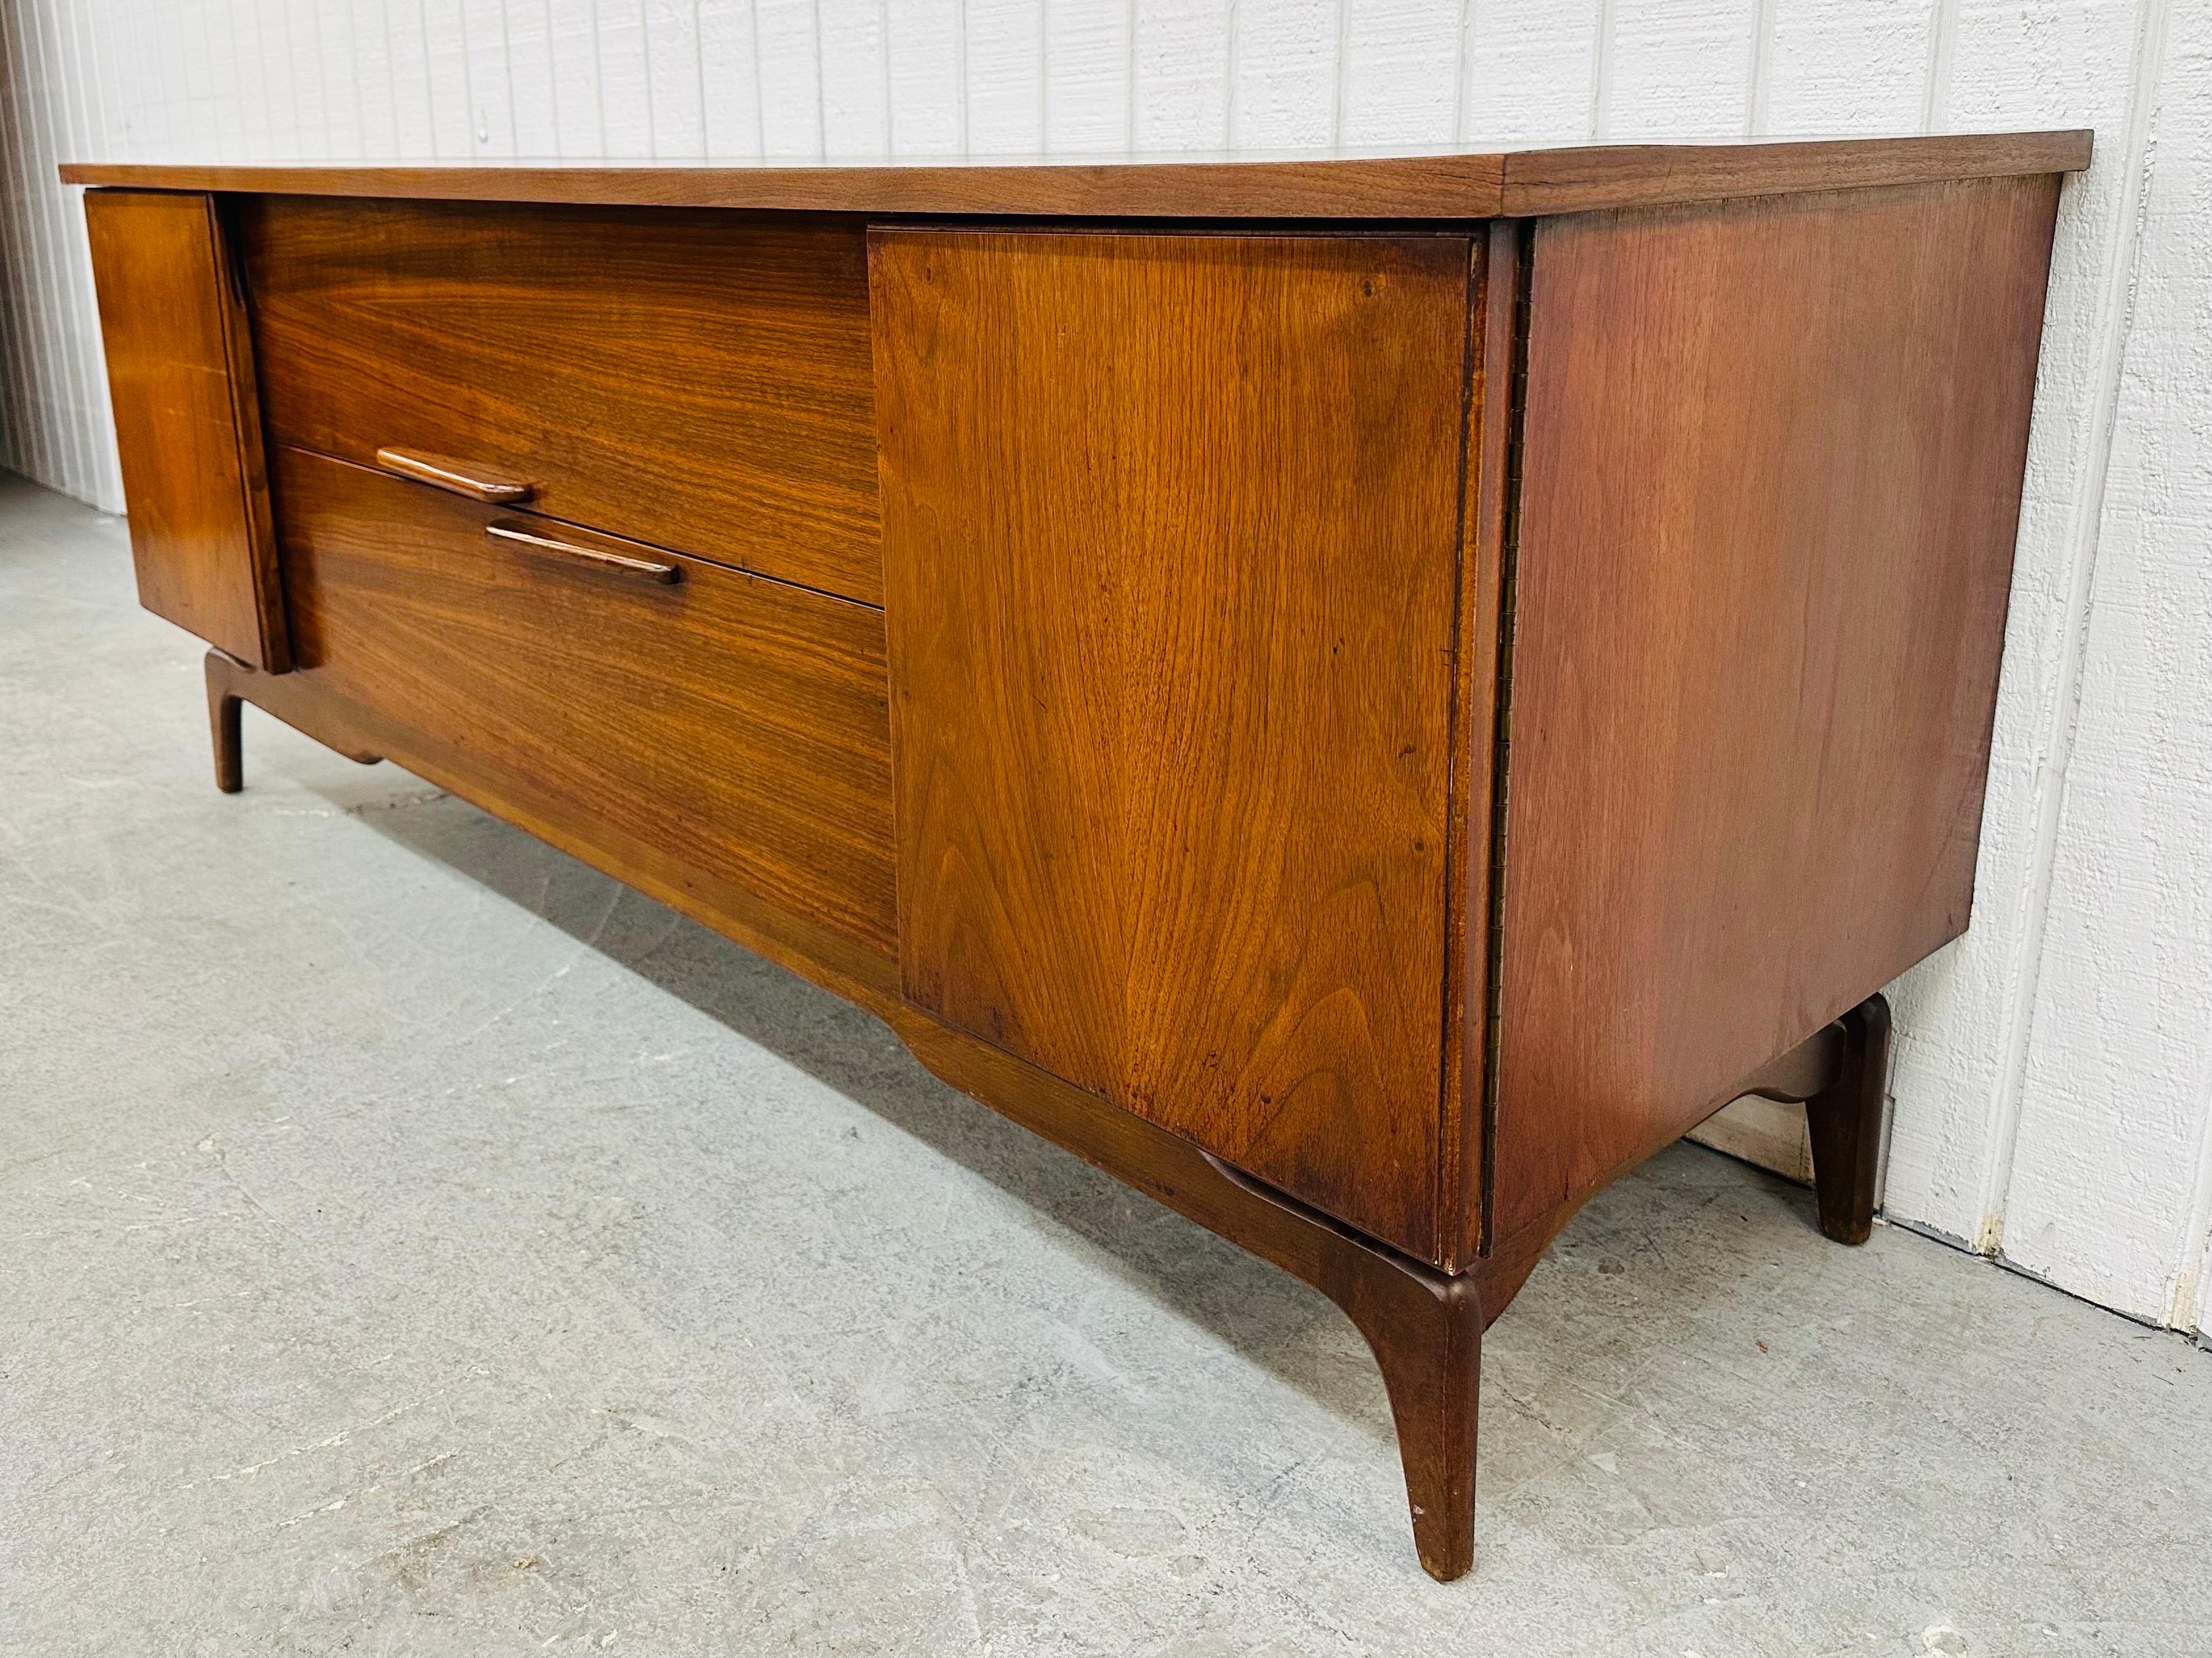 This listing is for a Mid-Century Modern John Cameron Walnut Sideboard. Featuring a straight line design, two doors that open up to storage space, two center drawers with wooden handles, freeform modern legs, and a beautiful walnut finish. This is